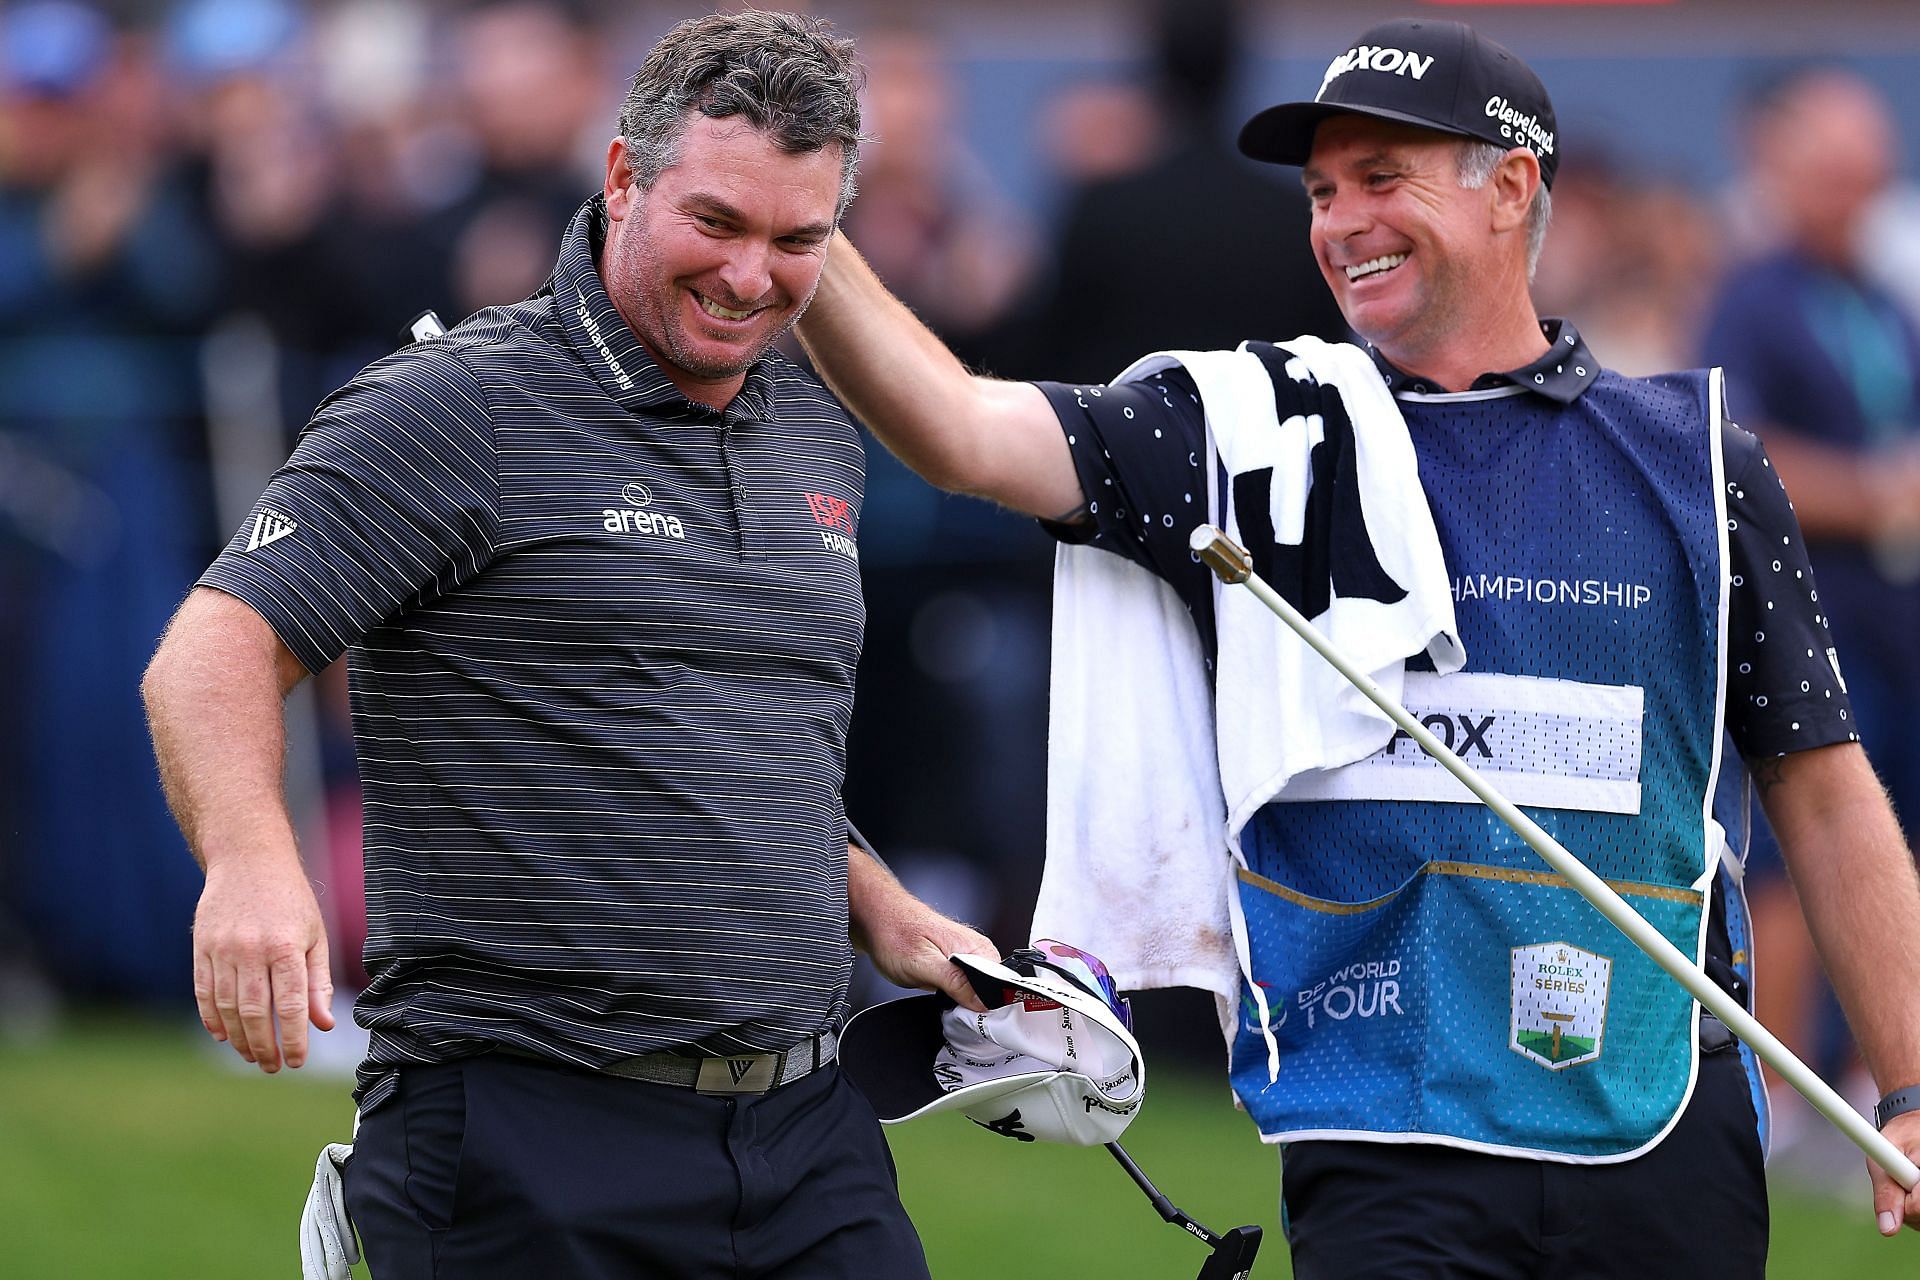 WATCH Ryan Fox shares emotional moment with his caddie after securing